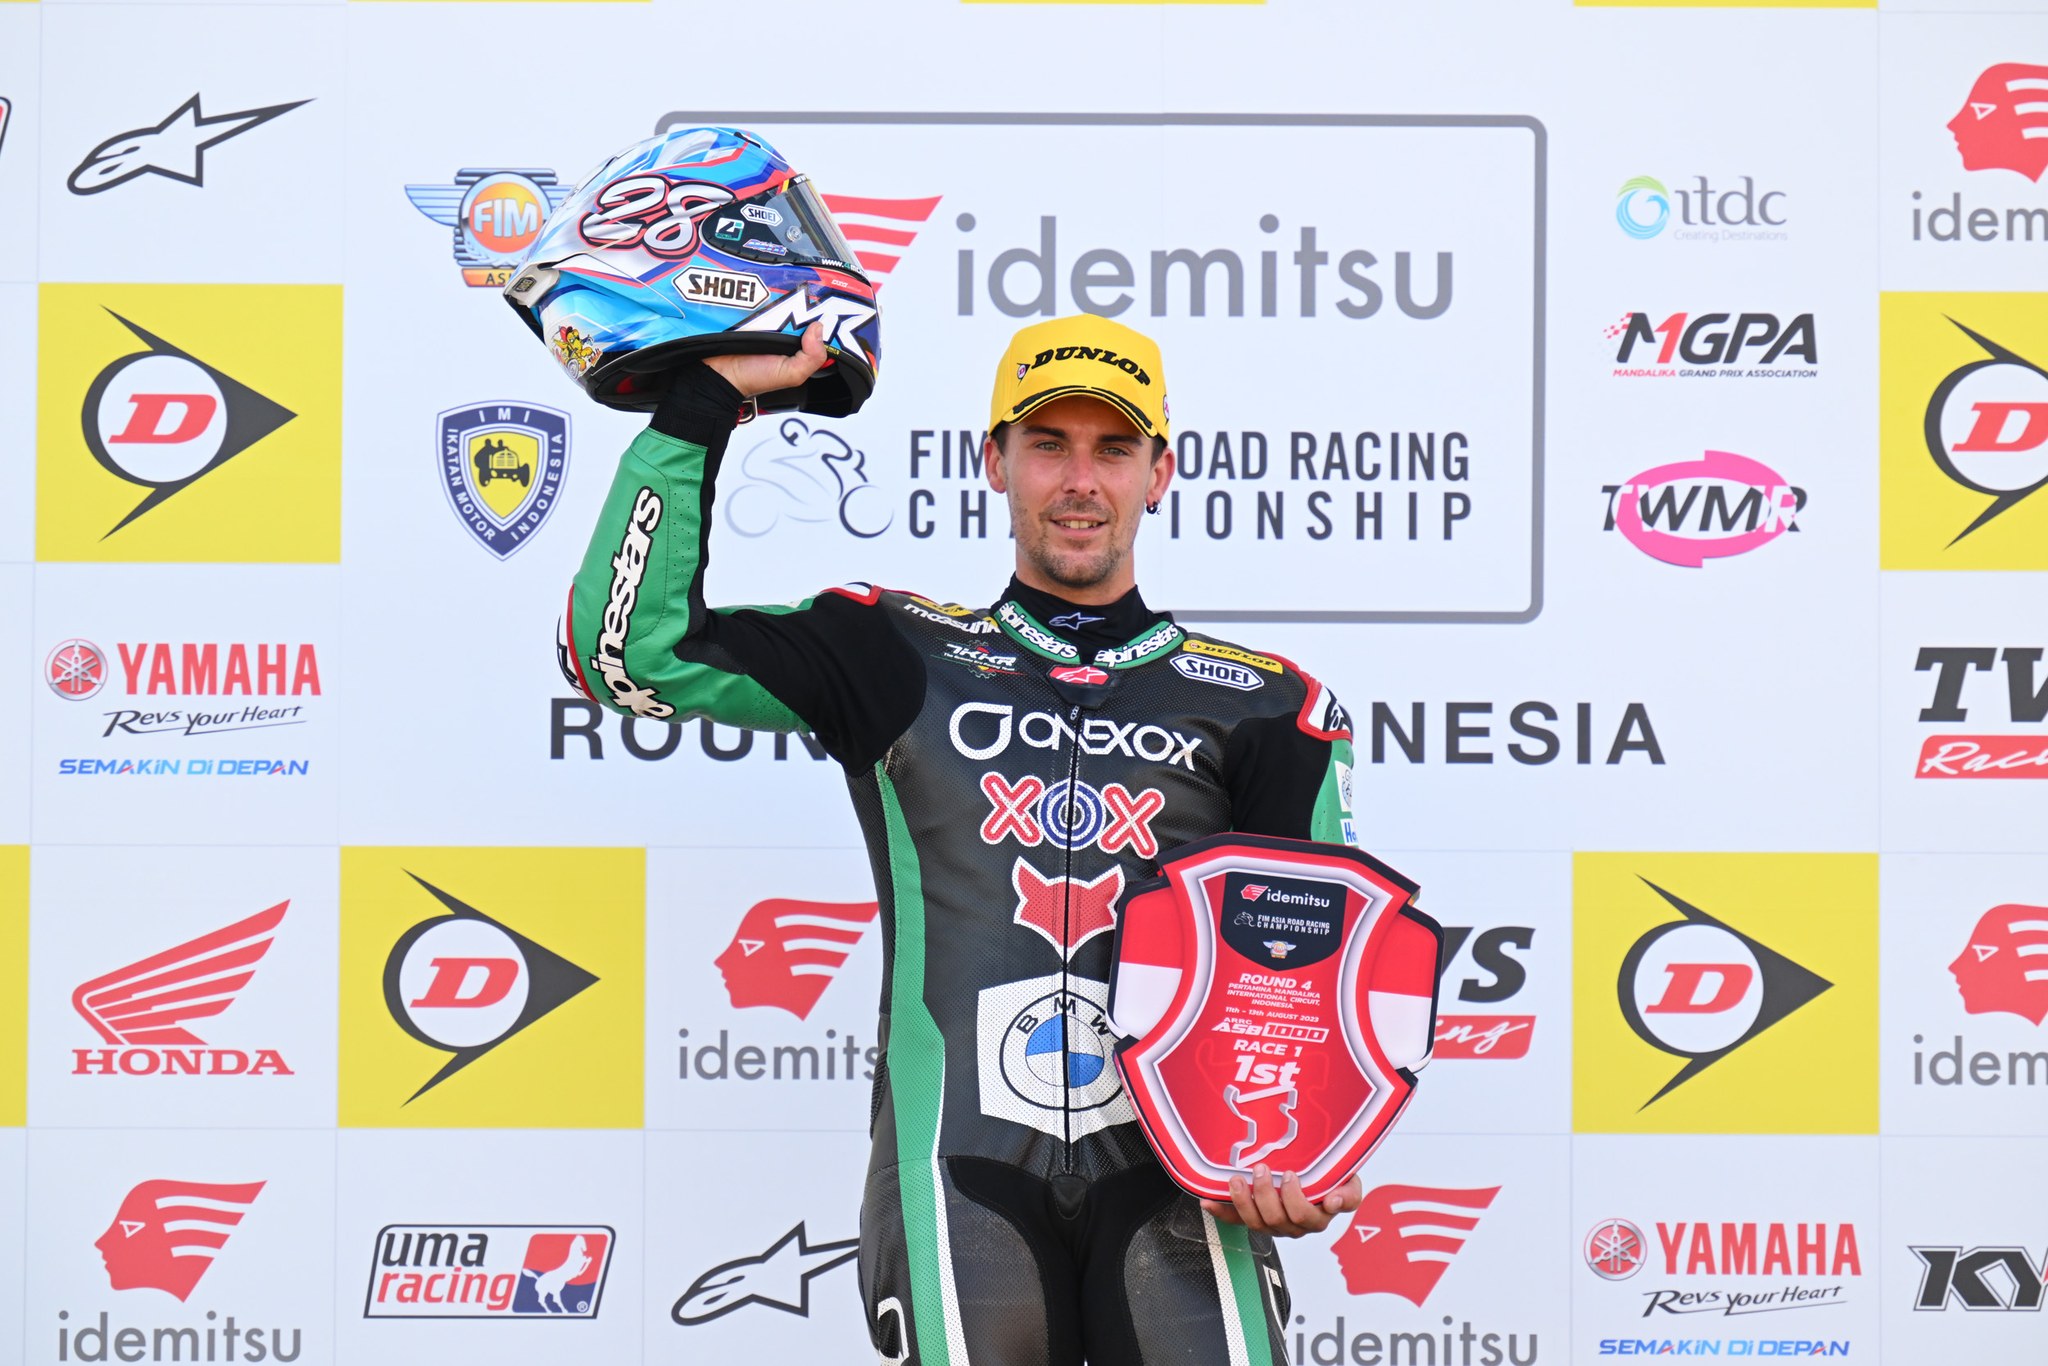 Marcus Reiterberger on the podium Race 1 of the Asia Road Racing Championship at